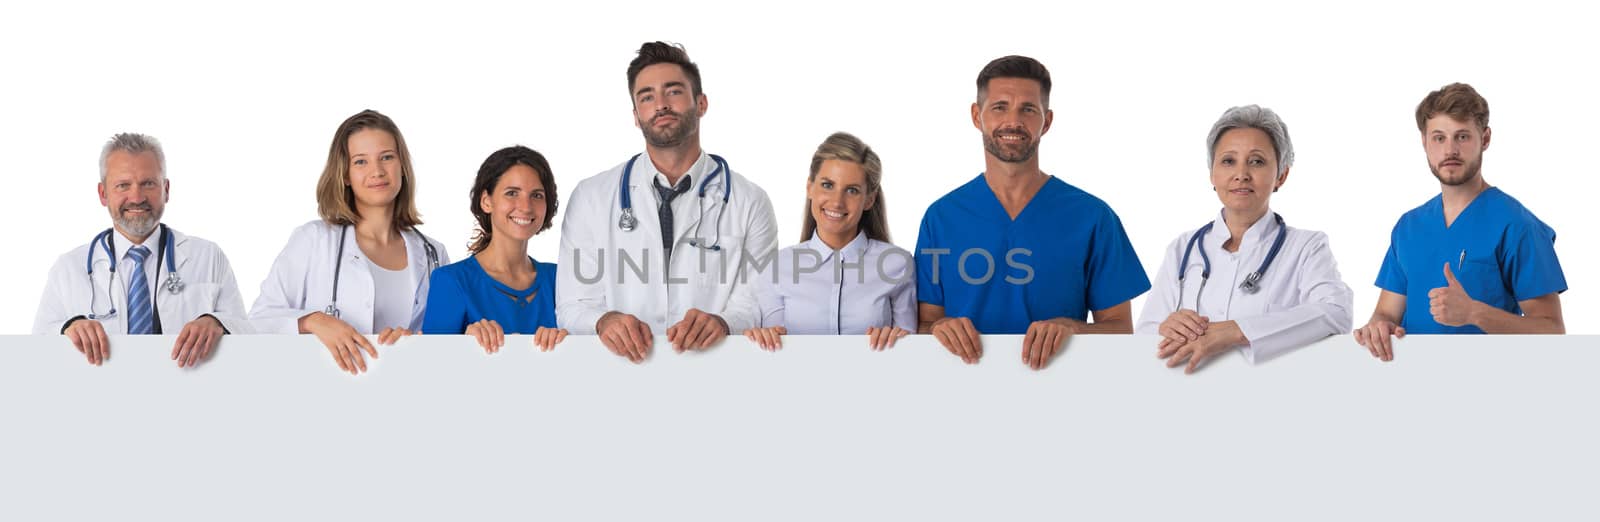 Group of doctors with blank banner isolated over a white background